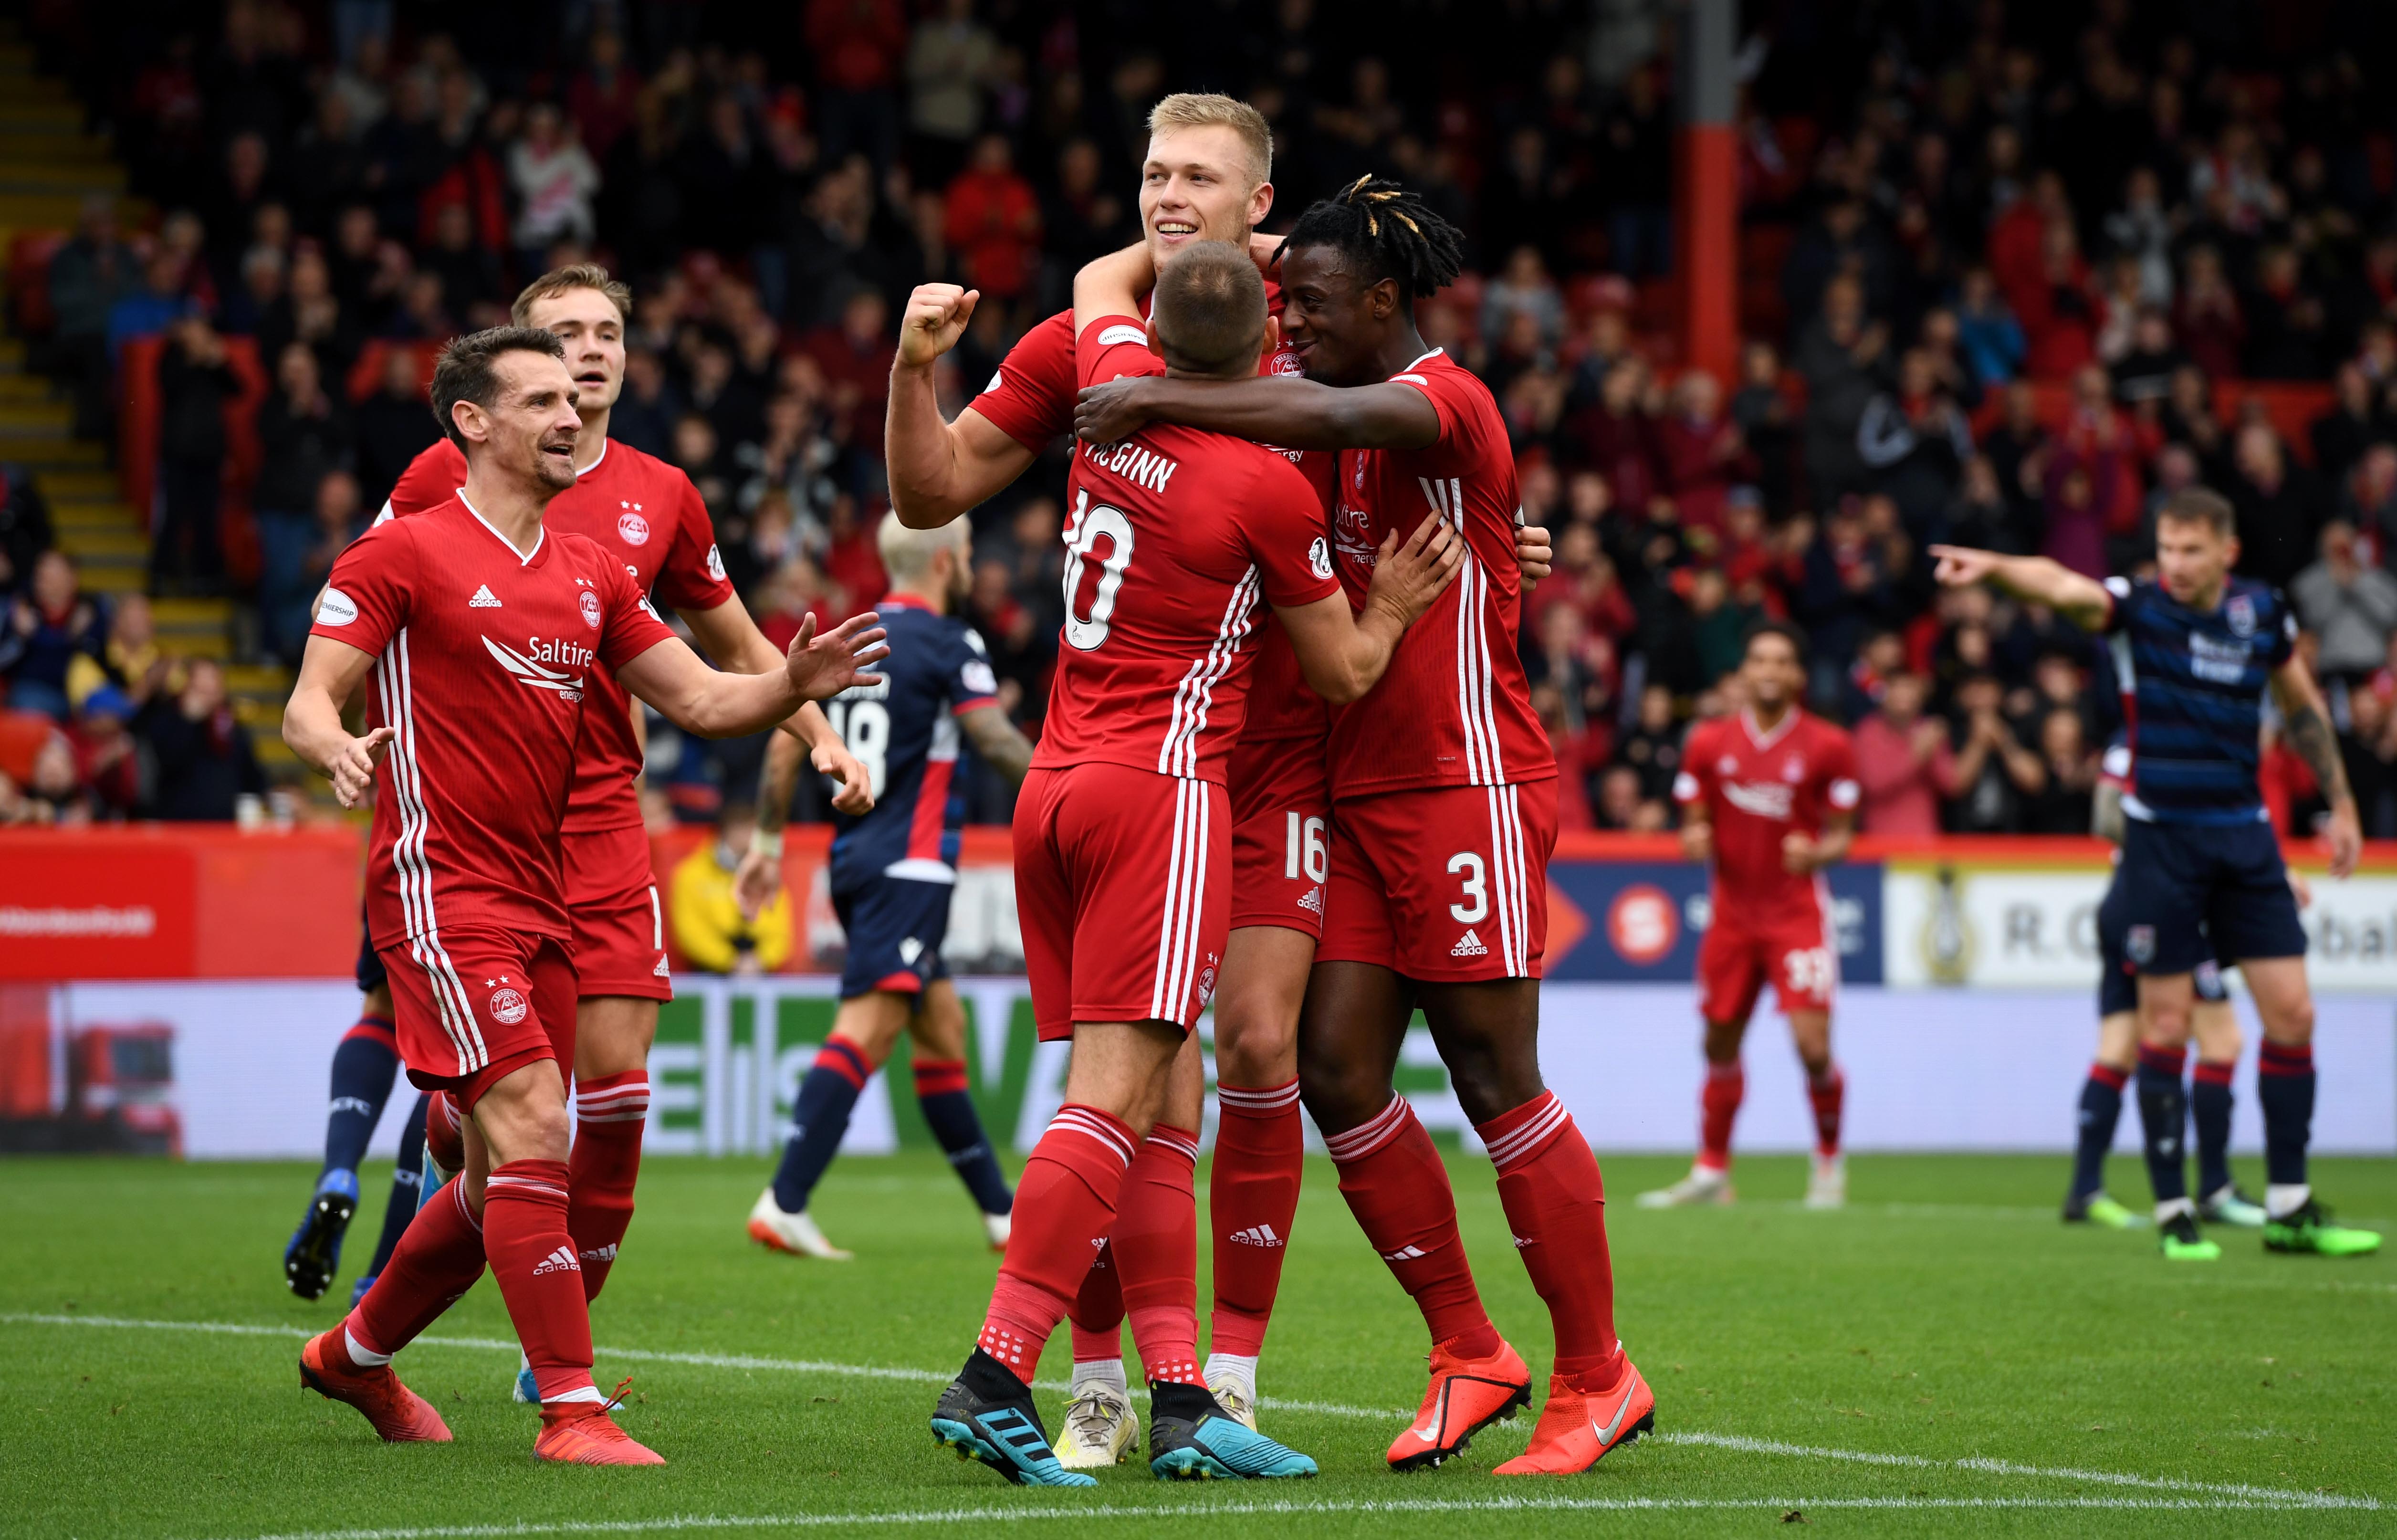 ABERDEEN, SCOTLAND - AUGUST 31: Aberdeen's Sam Cosgrove celebrates his goal during the Ladbrokes Premiership match between Aberdeen and Ross County at Pittodrie Stadium on August 31, 2019, in Aberdeen, Scotland (Photo by Craig Williamson / SNS Group)